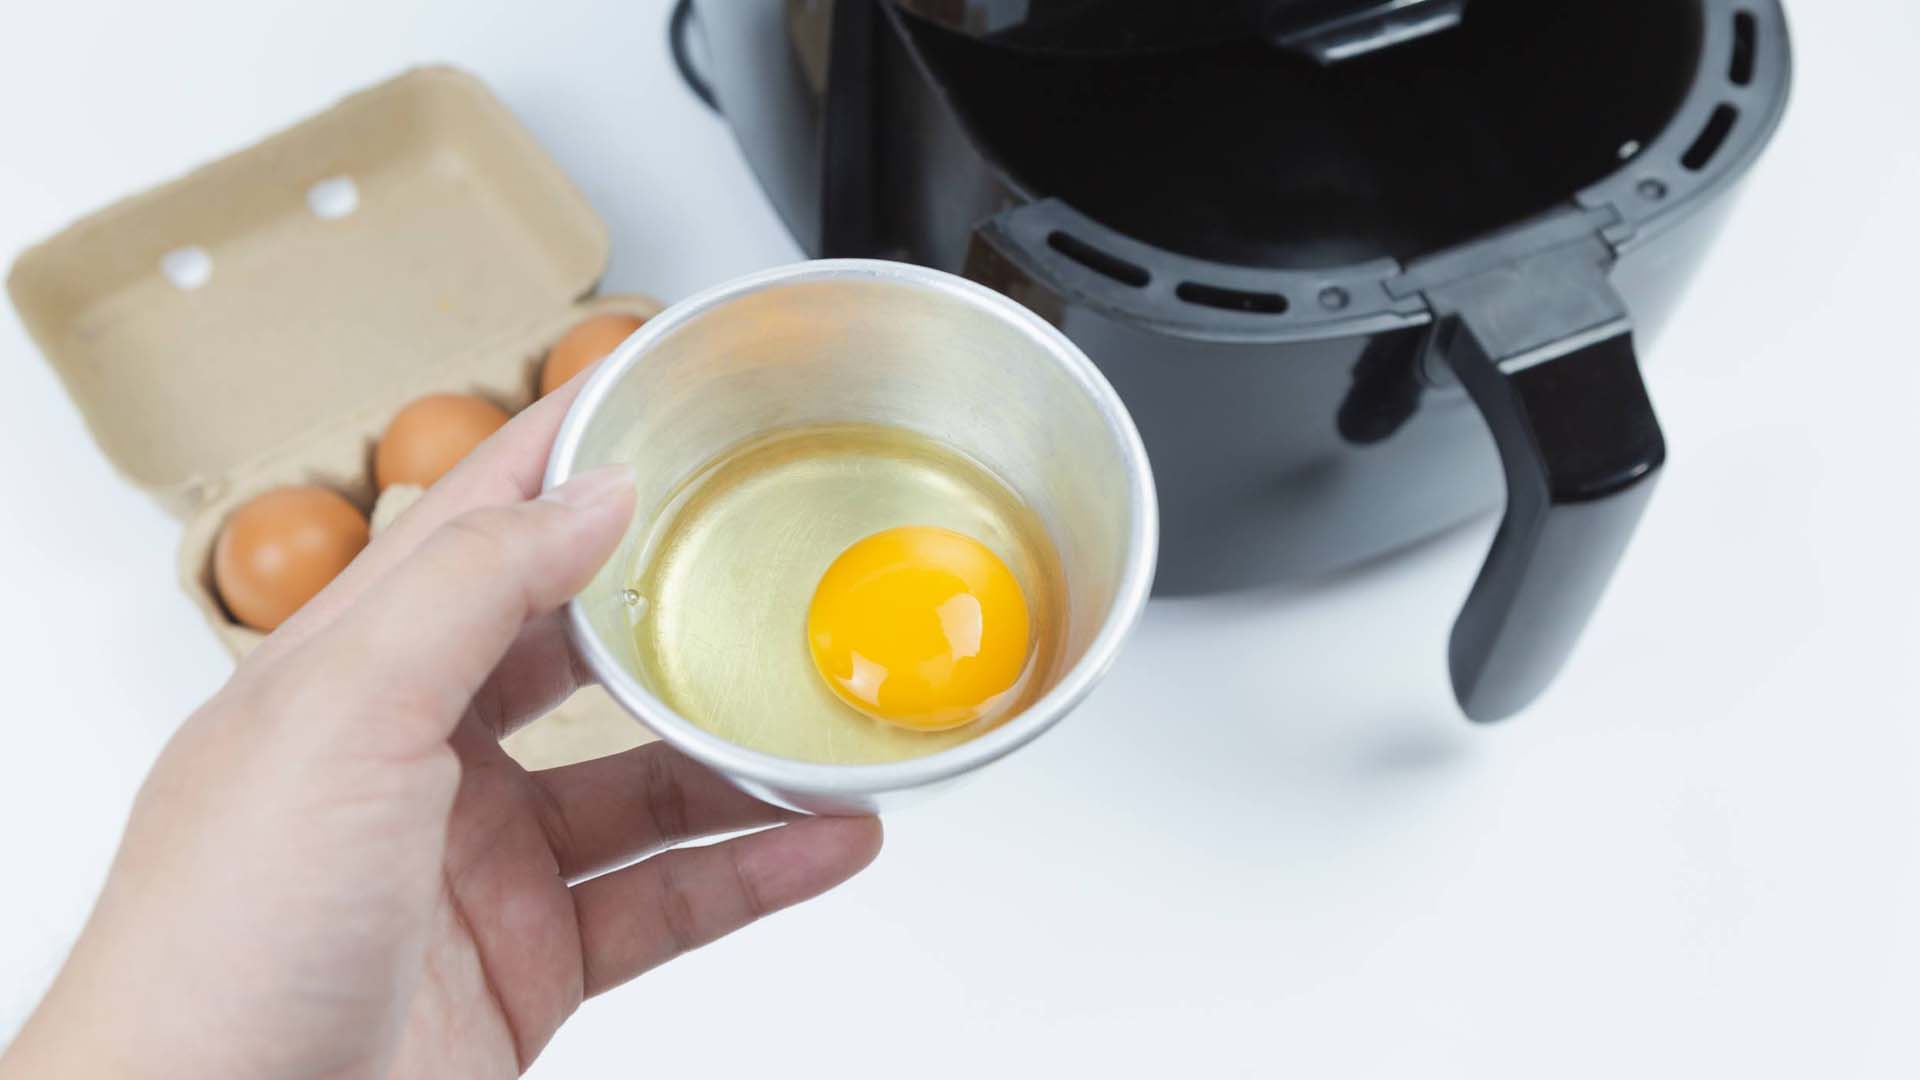 A person putting eggs into the air fryer